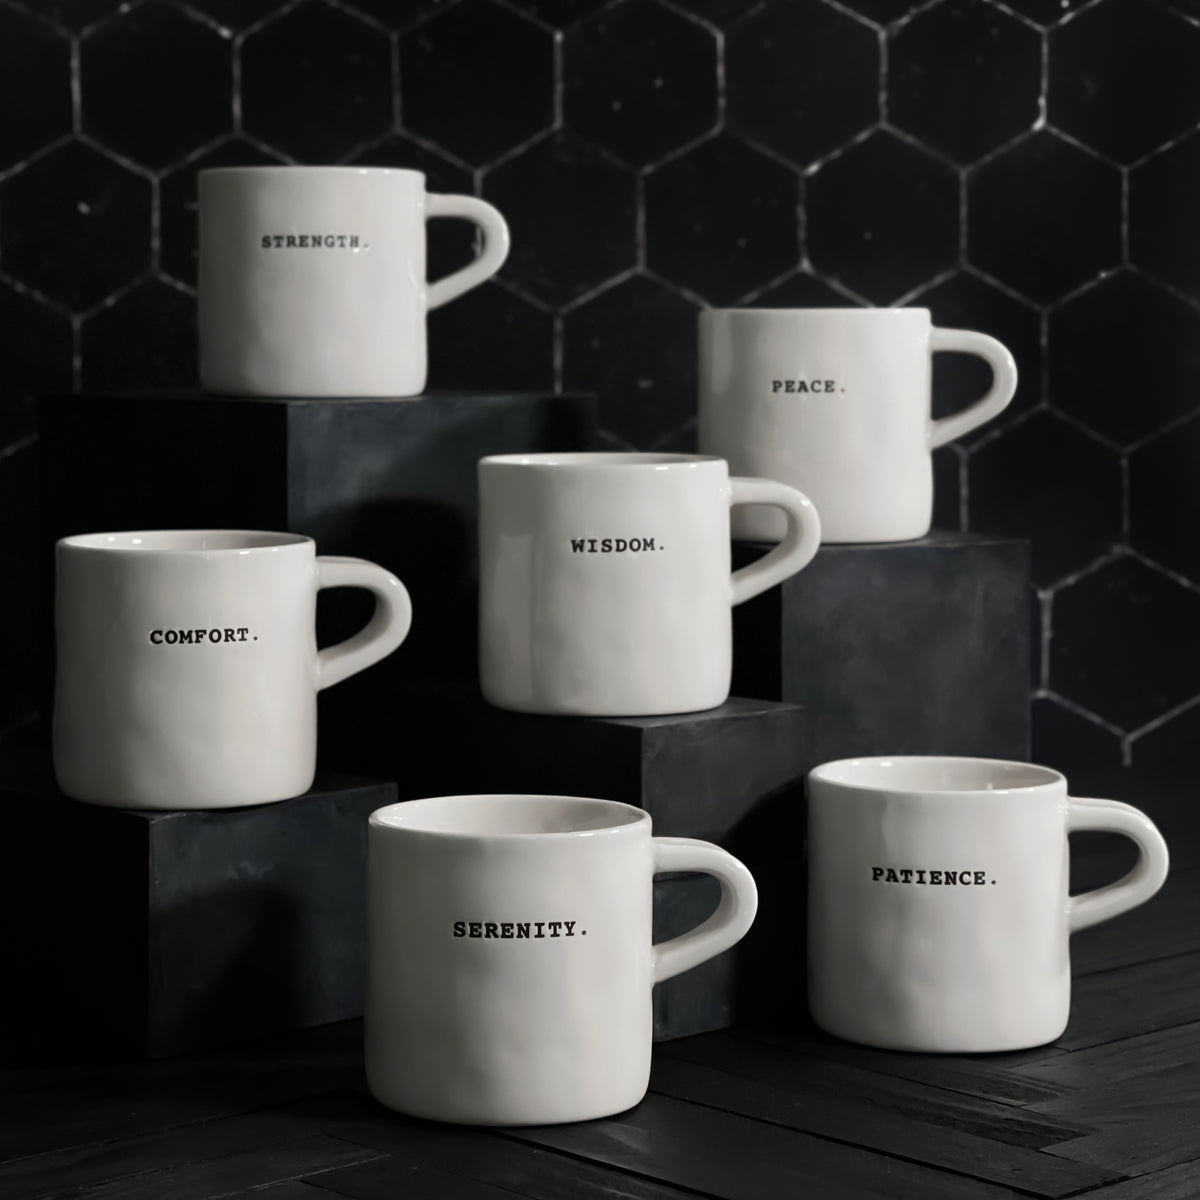 Quonset On! Two-sided Black & White Ceramic Mug - Clever Moderns